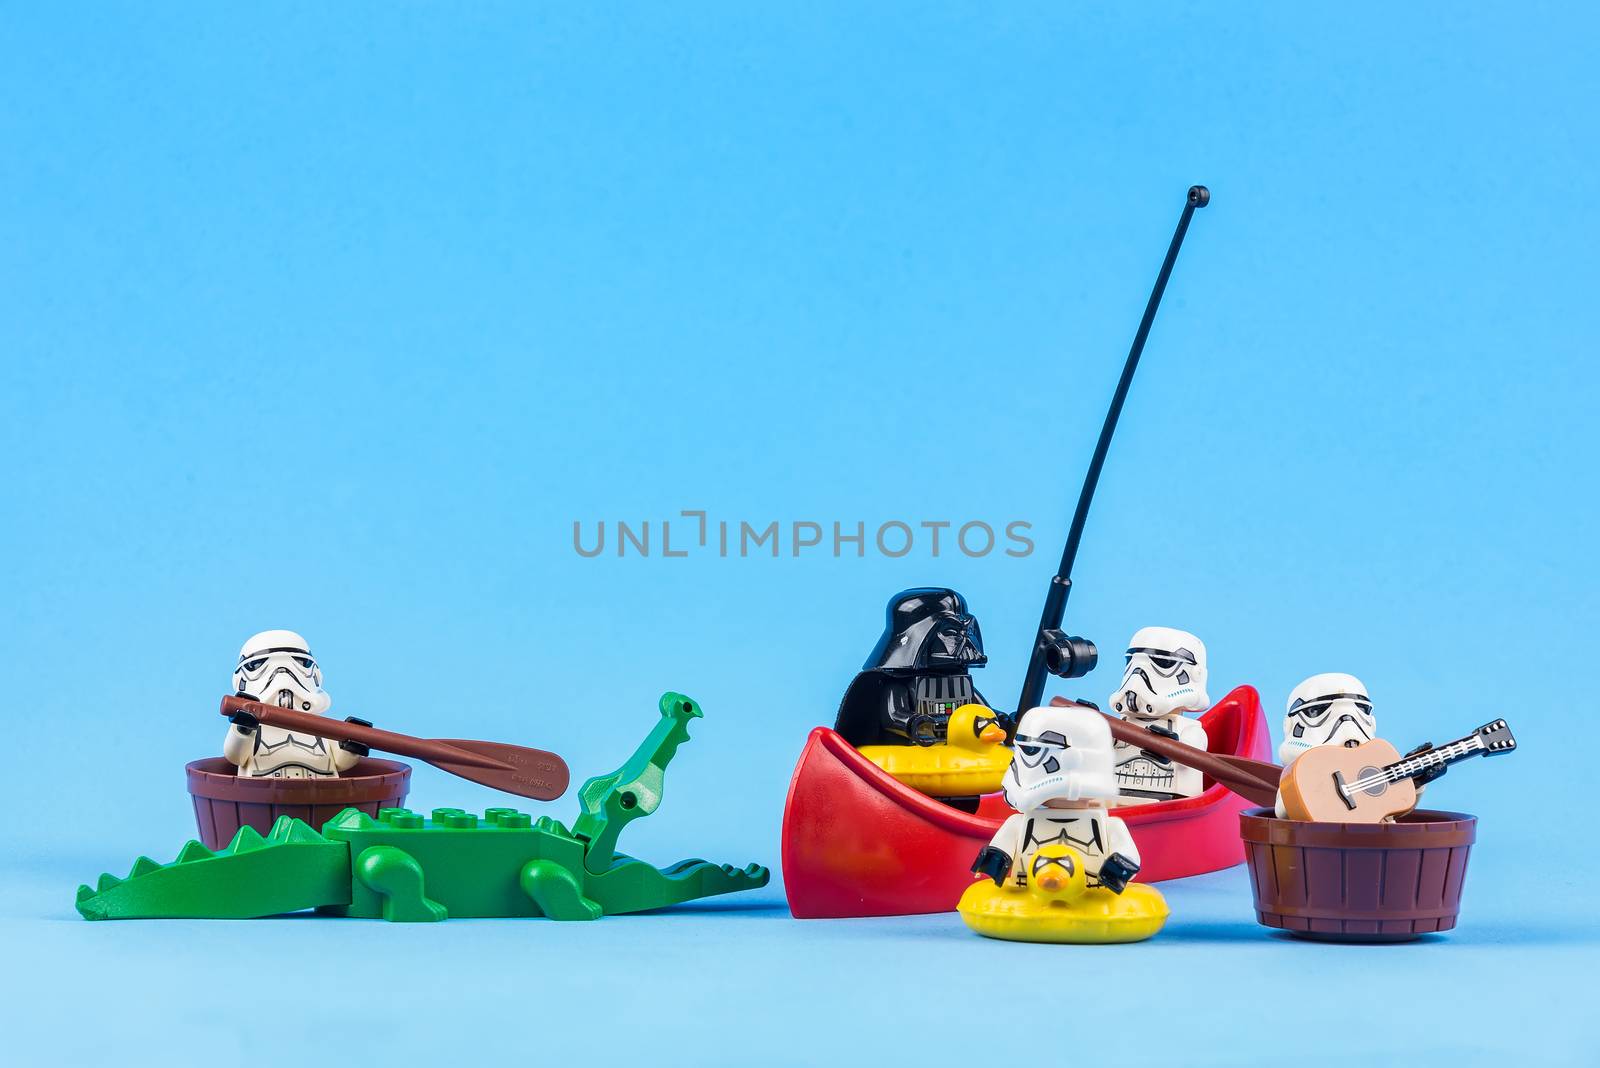 Bangkok, Thailand - June, 08, 2010 : Lego Star Wars is rowing away from the crocodiles isolated on a blue background at Bangkok, Thailand. Fun concept